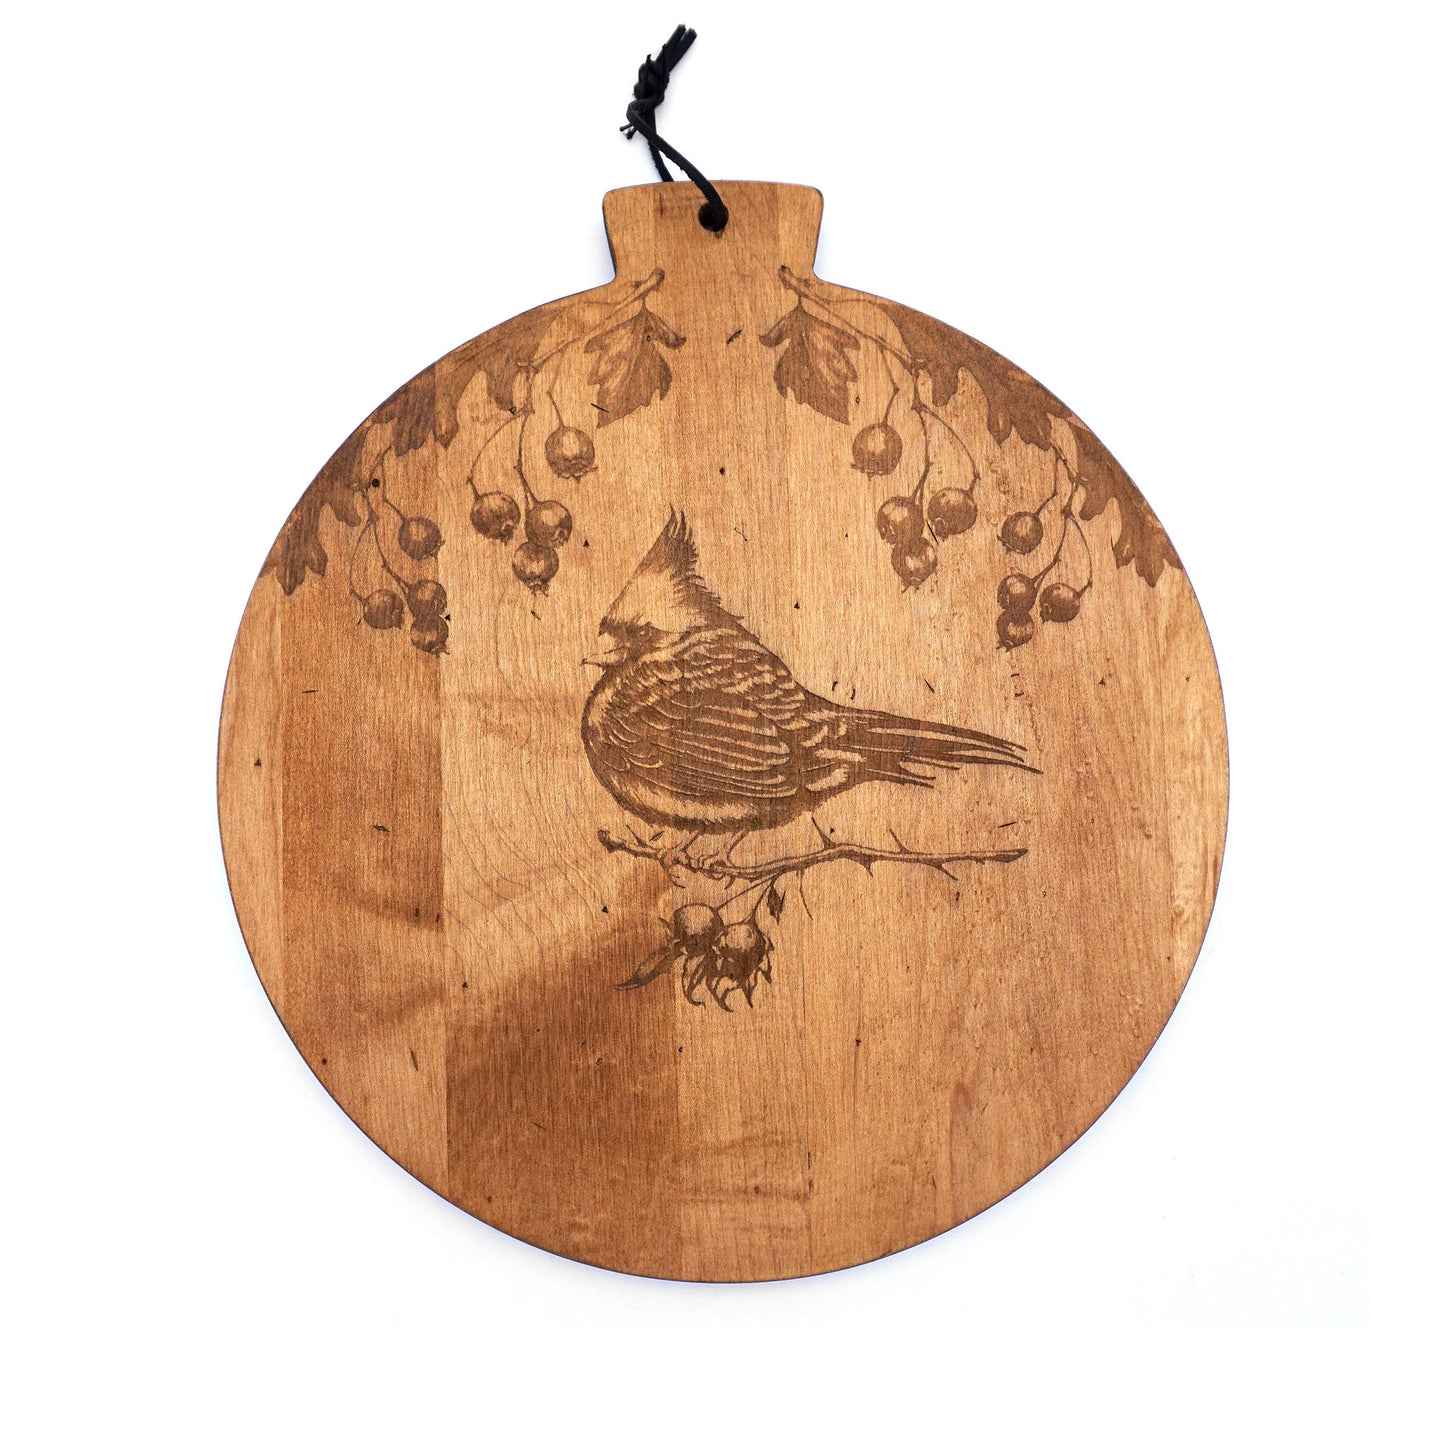 Laura Zindel Artisan Maple Round Serving Board - More designs available